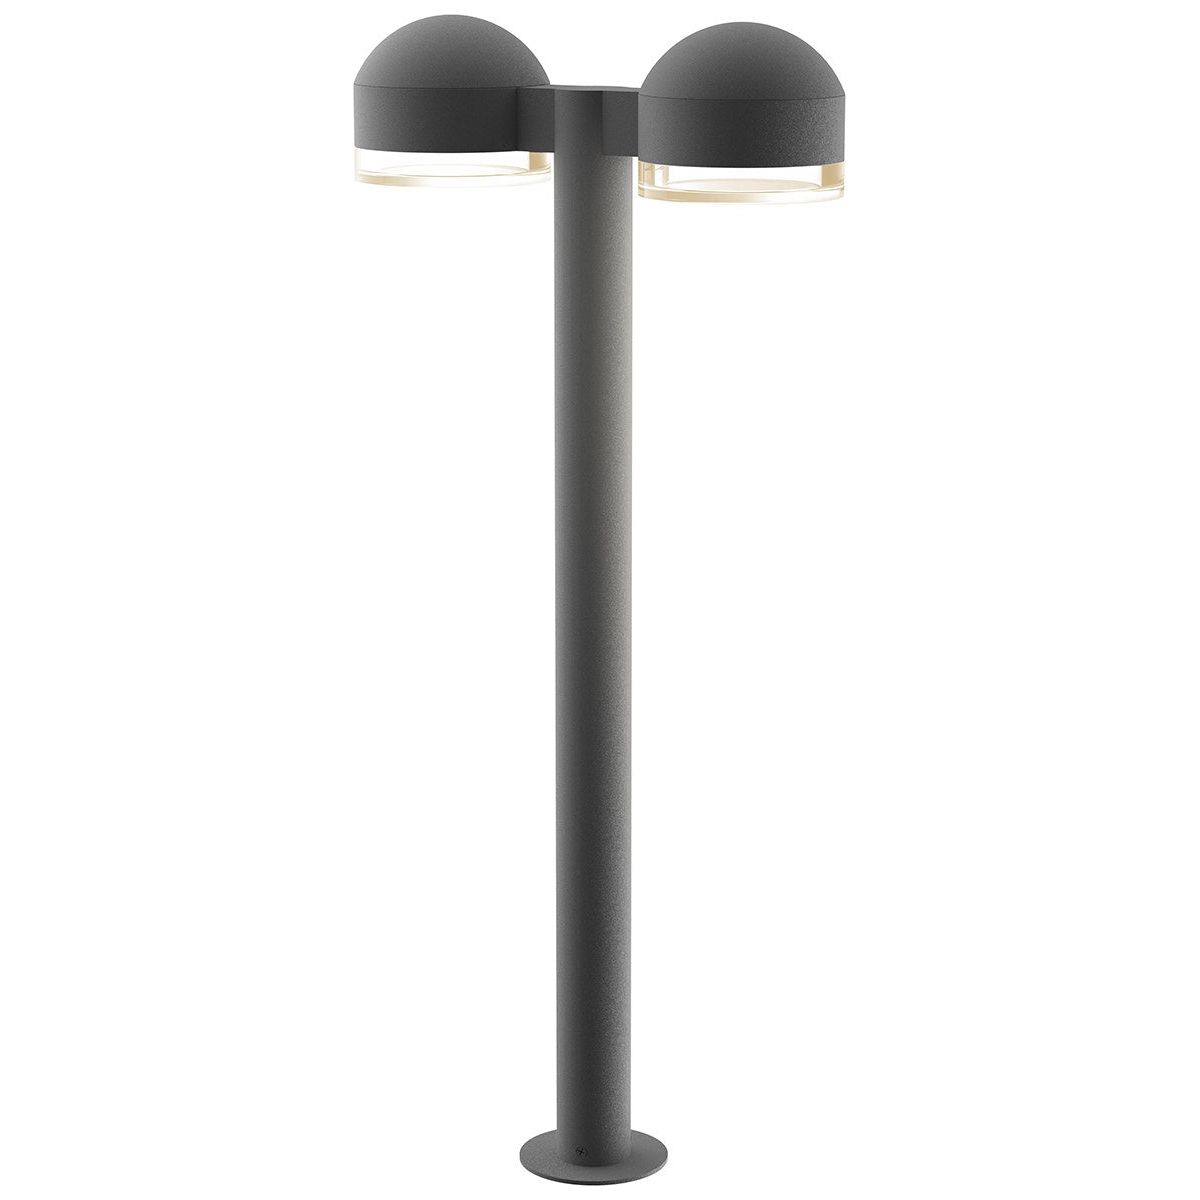 REALS 28" LED Double Bollard with Dome Cap and Cylinder Lens